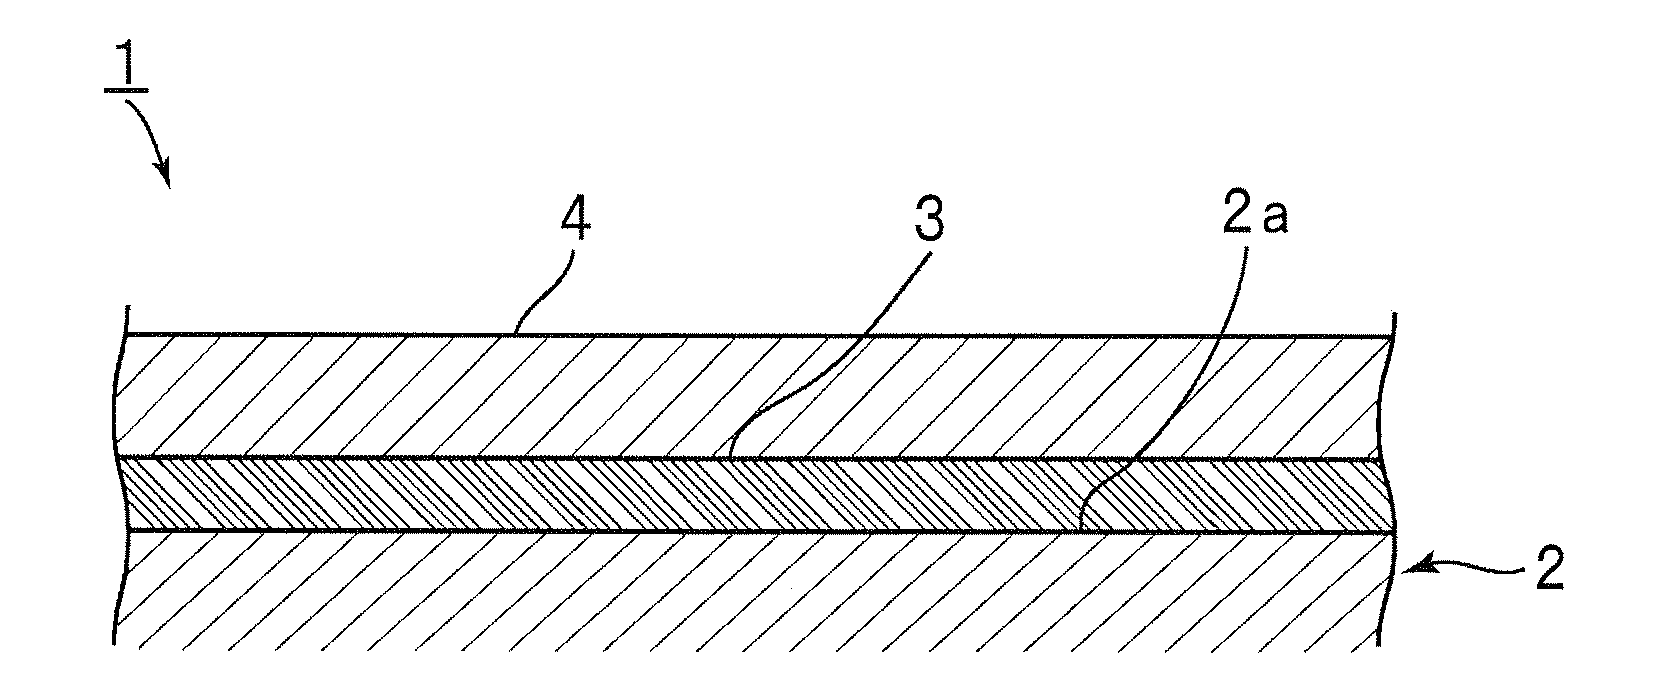 Insulating sheet and multilayer structure